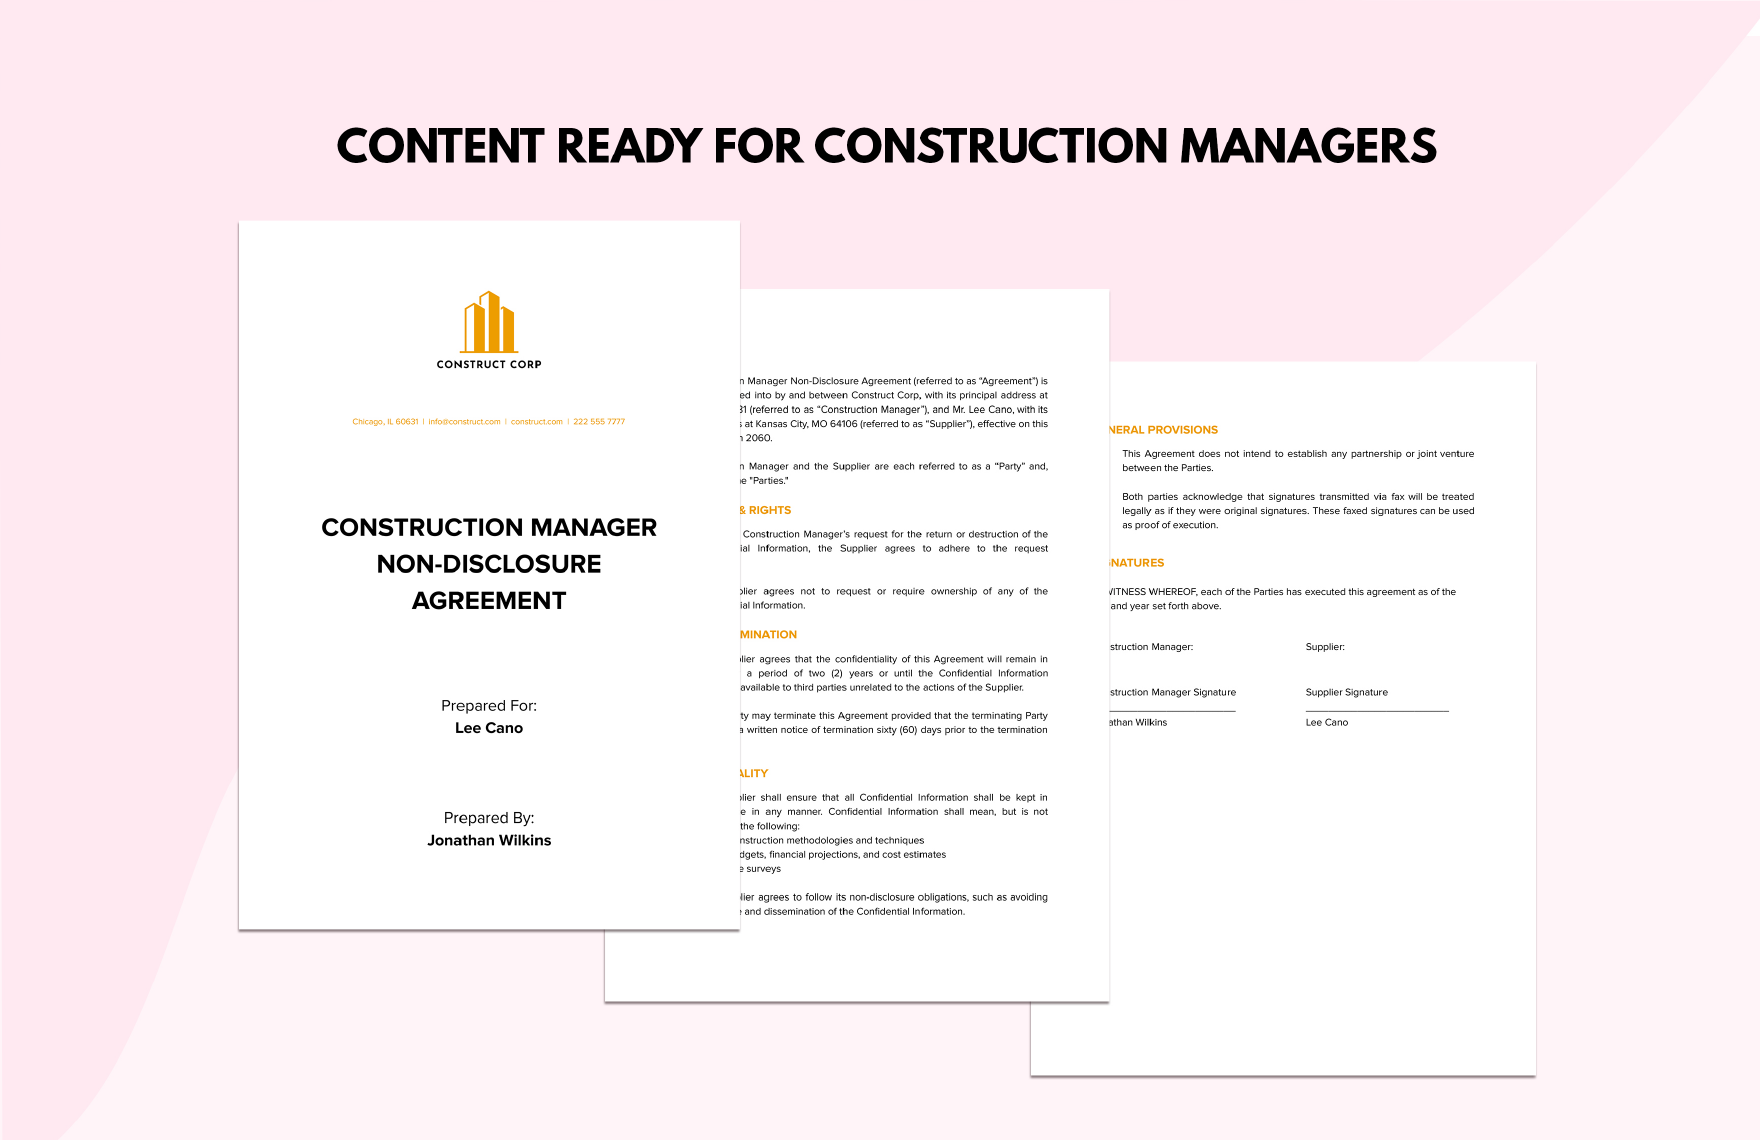 Construction Manager Non-Disclosure Agreement 